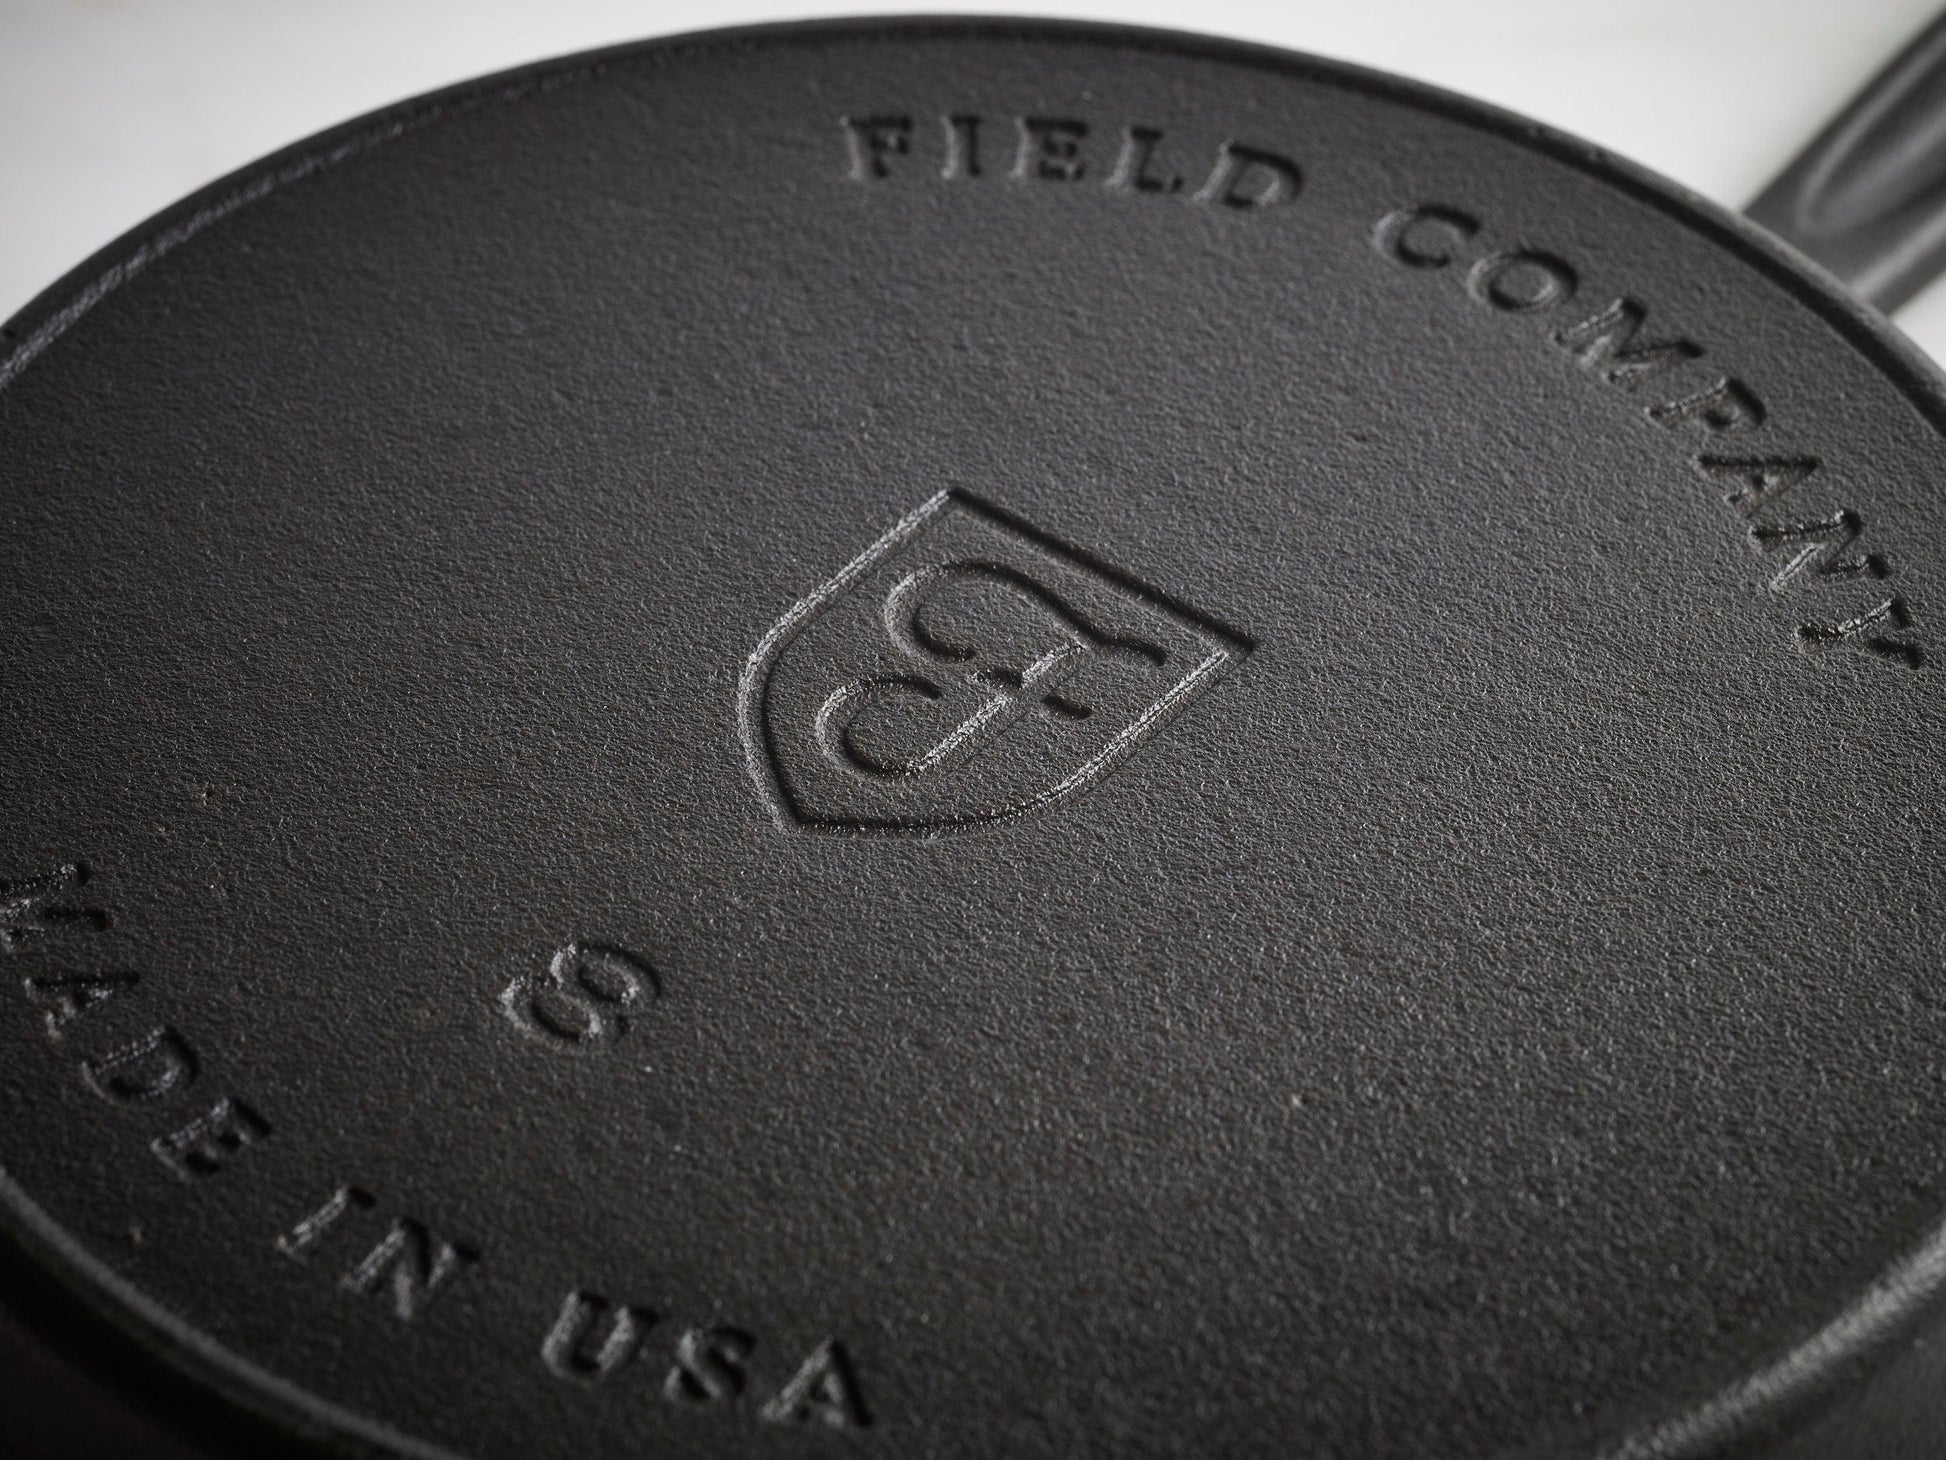 Back or underside of Field Company number 8 skillet. Text reads "Field Company, 8, Made in the USA."